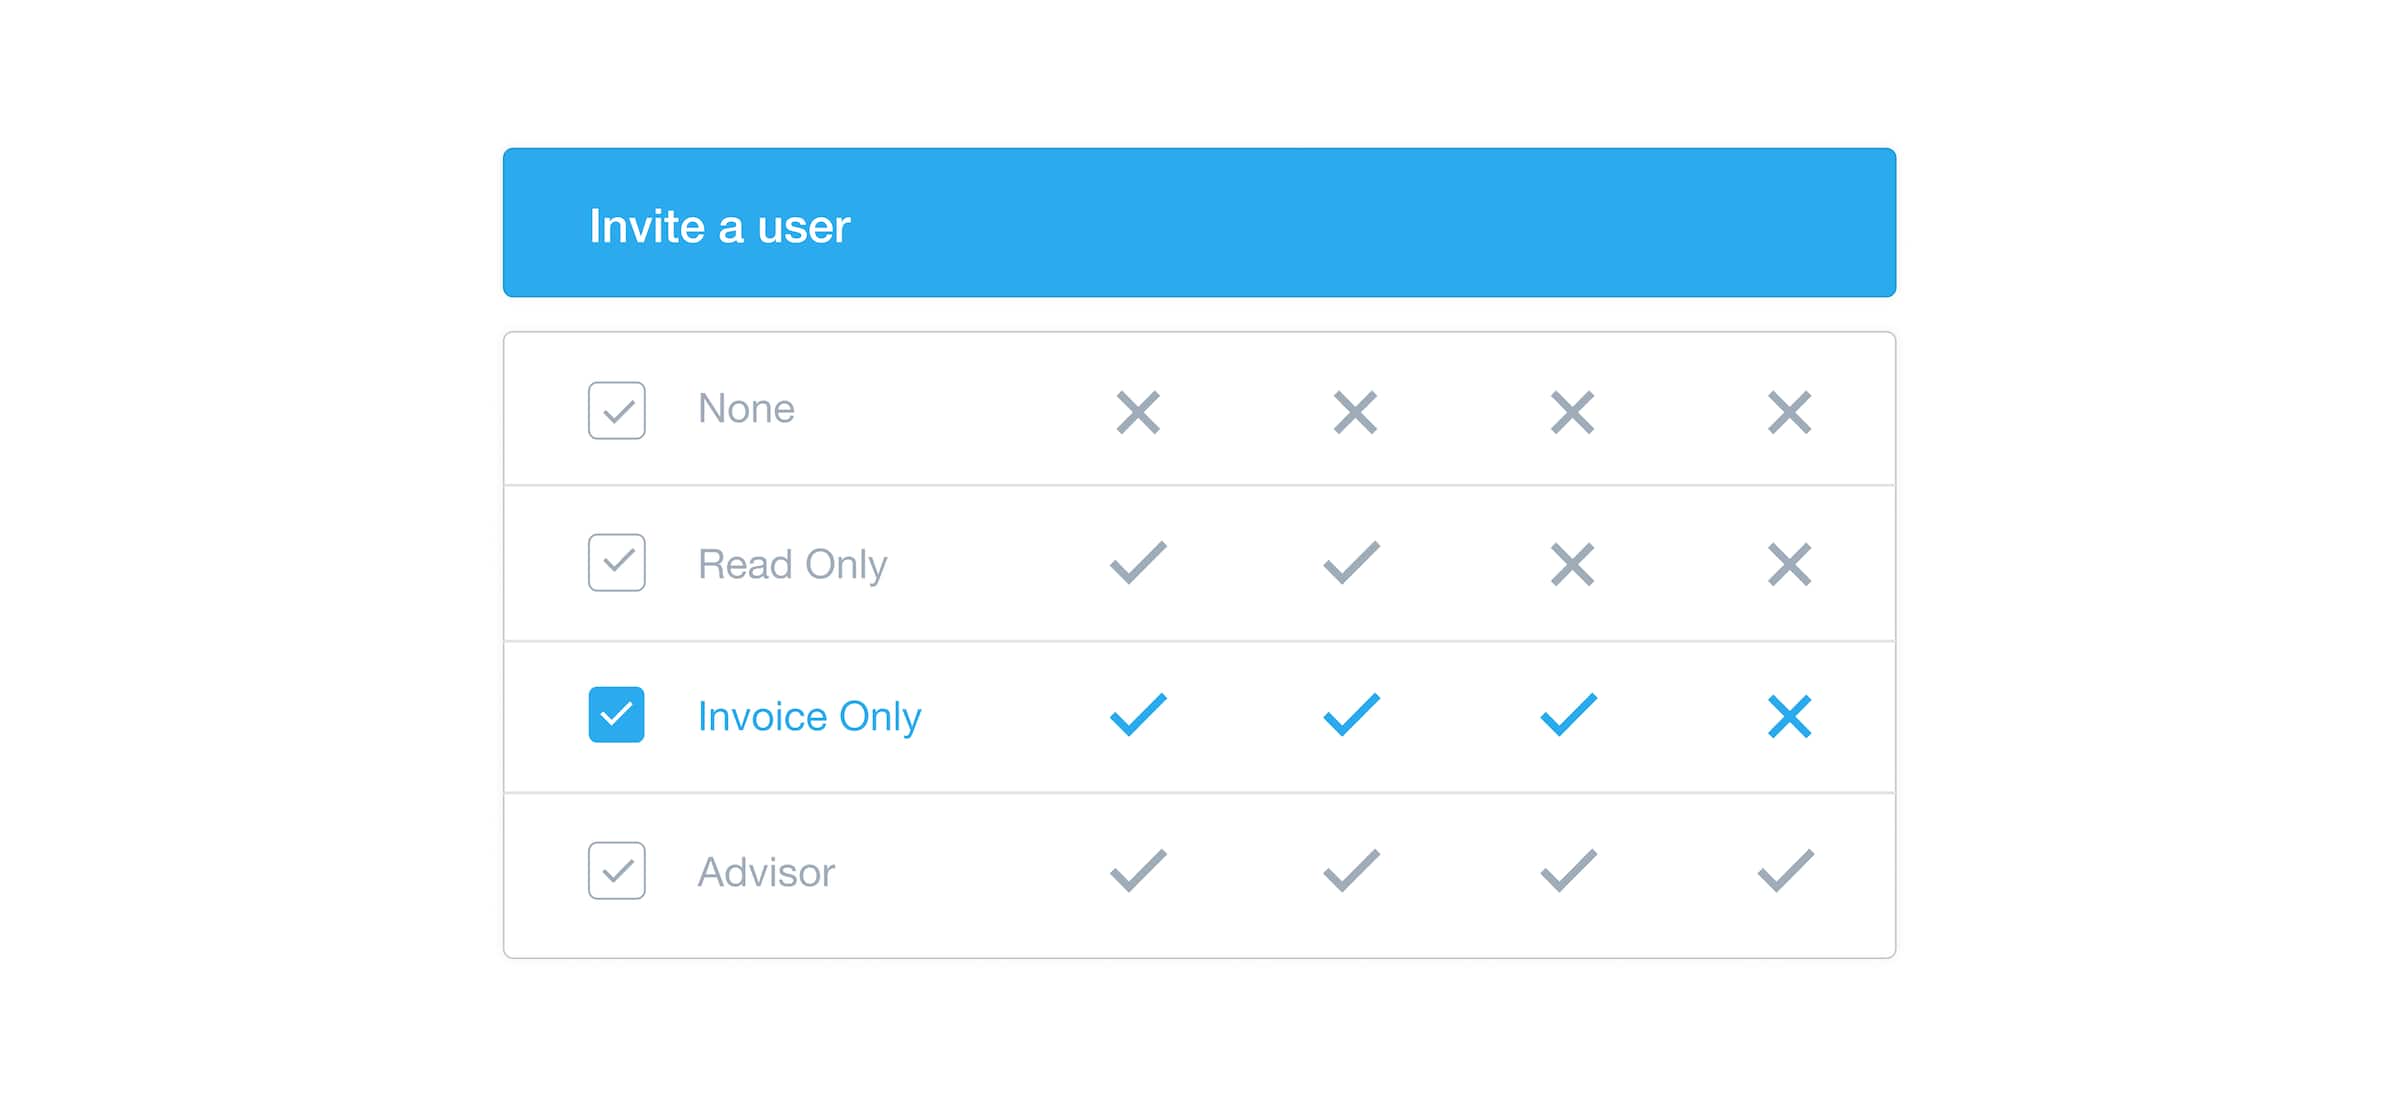 Xero’s ‘Invite a user’ screen shows ticks and ‘X’ marks for access rules, allowing you to control what users can see and do.